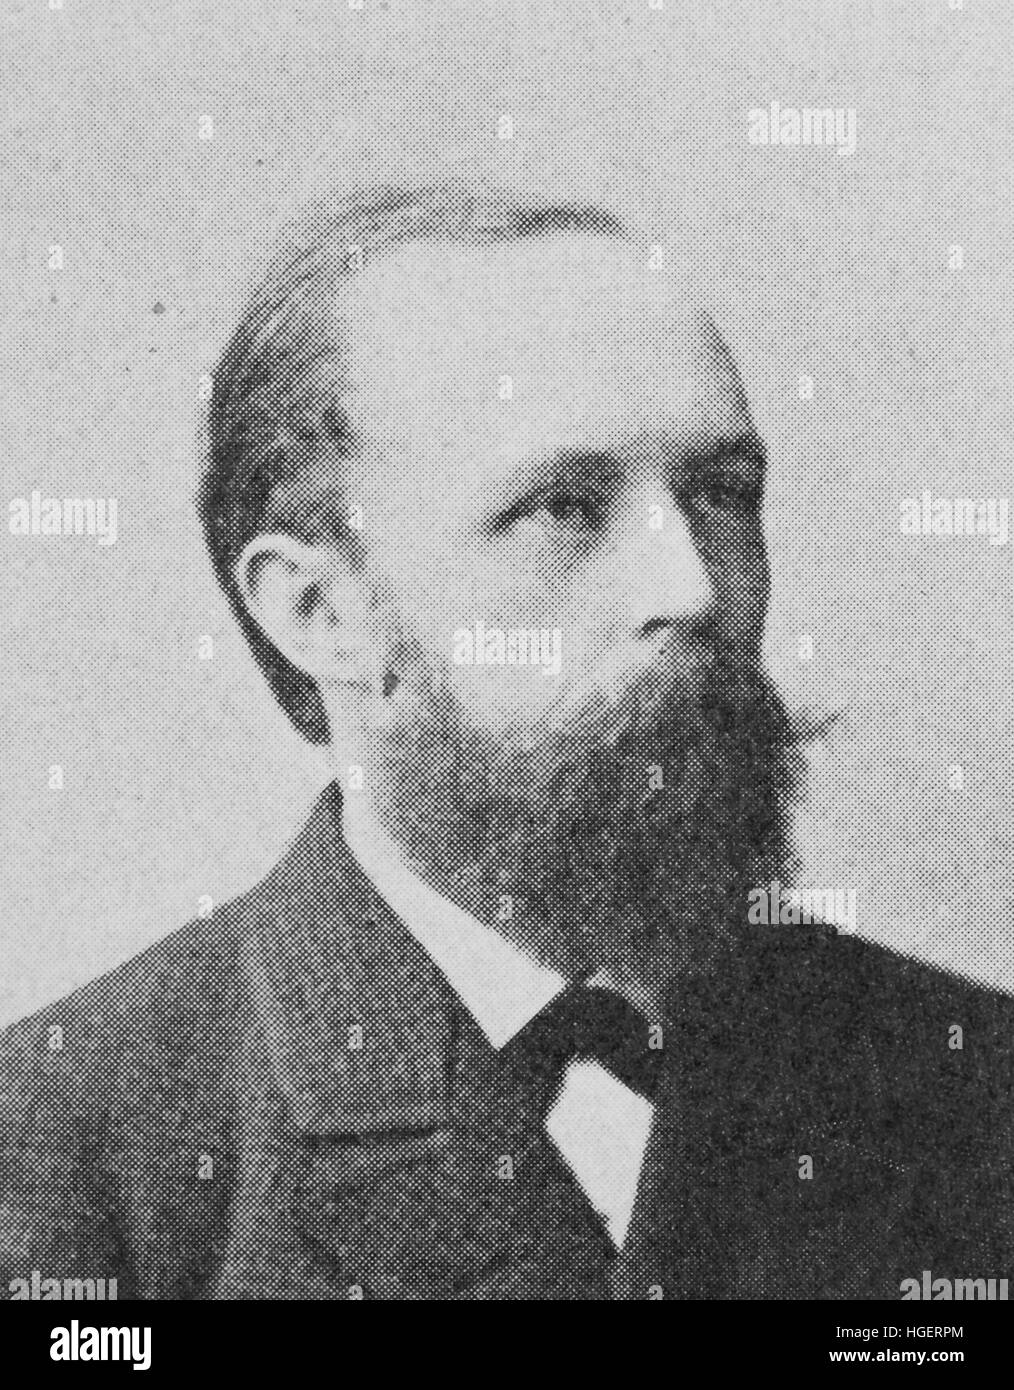 Emil Adolf Oskar Froelich, Born November 23, 1843; Died July 6, 1909, was a technician who worked in the fields of electrical engineering, telegraphy, electrochemistry and solar heat in Berlin, reproduction of a photo from the year 1895, digital improved Stock Photo